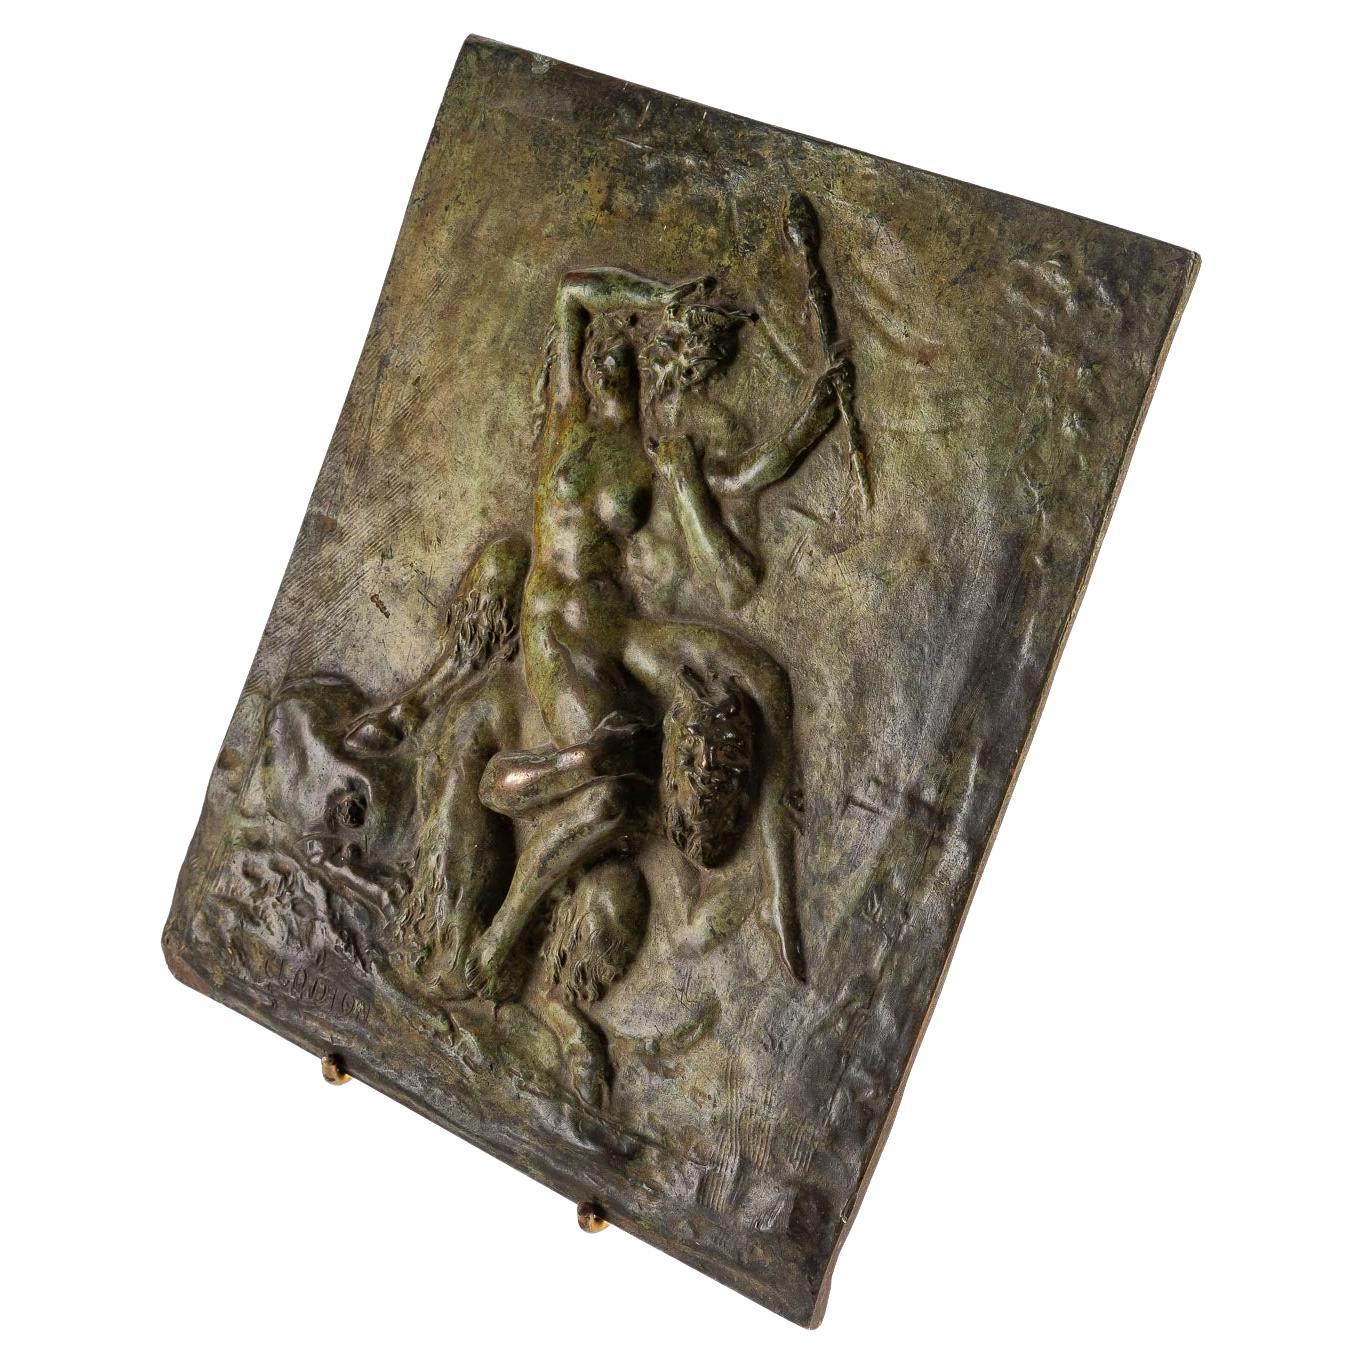 Bronze Plate with Patina Representing Fauns, Signed Clodion